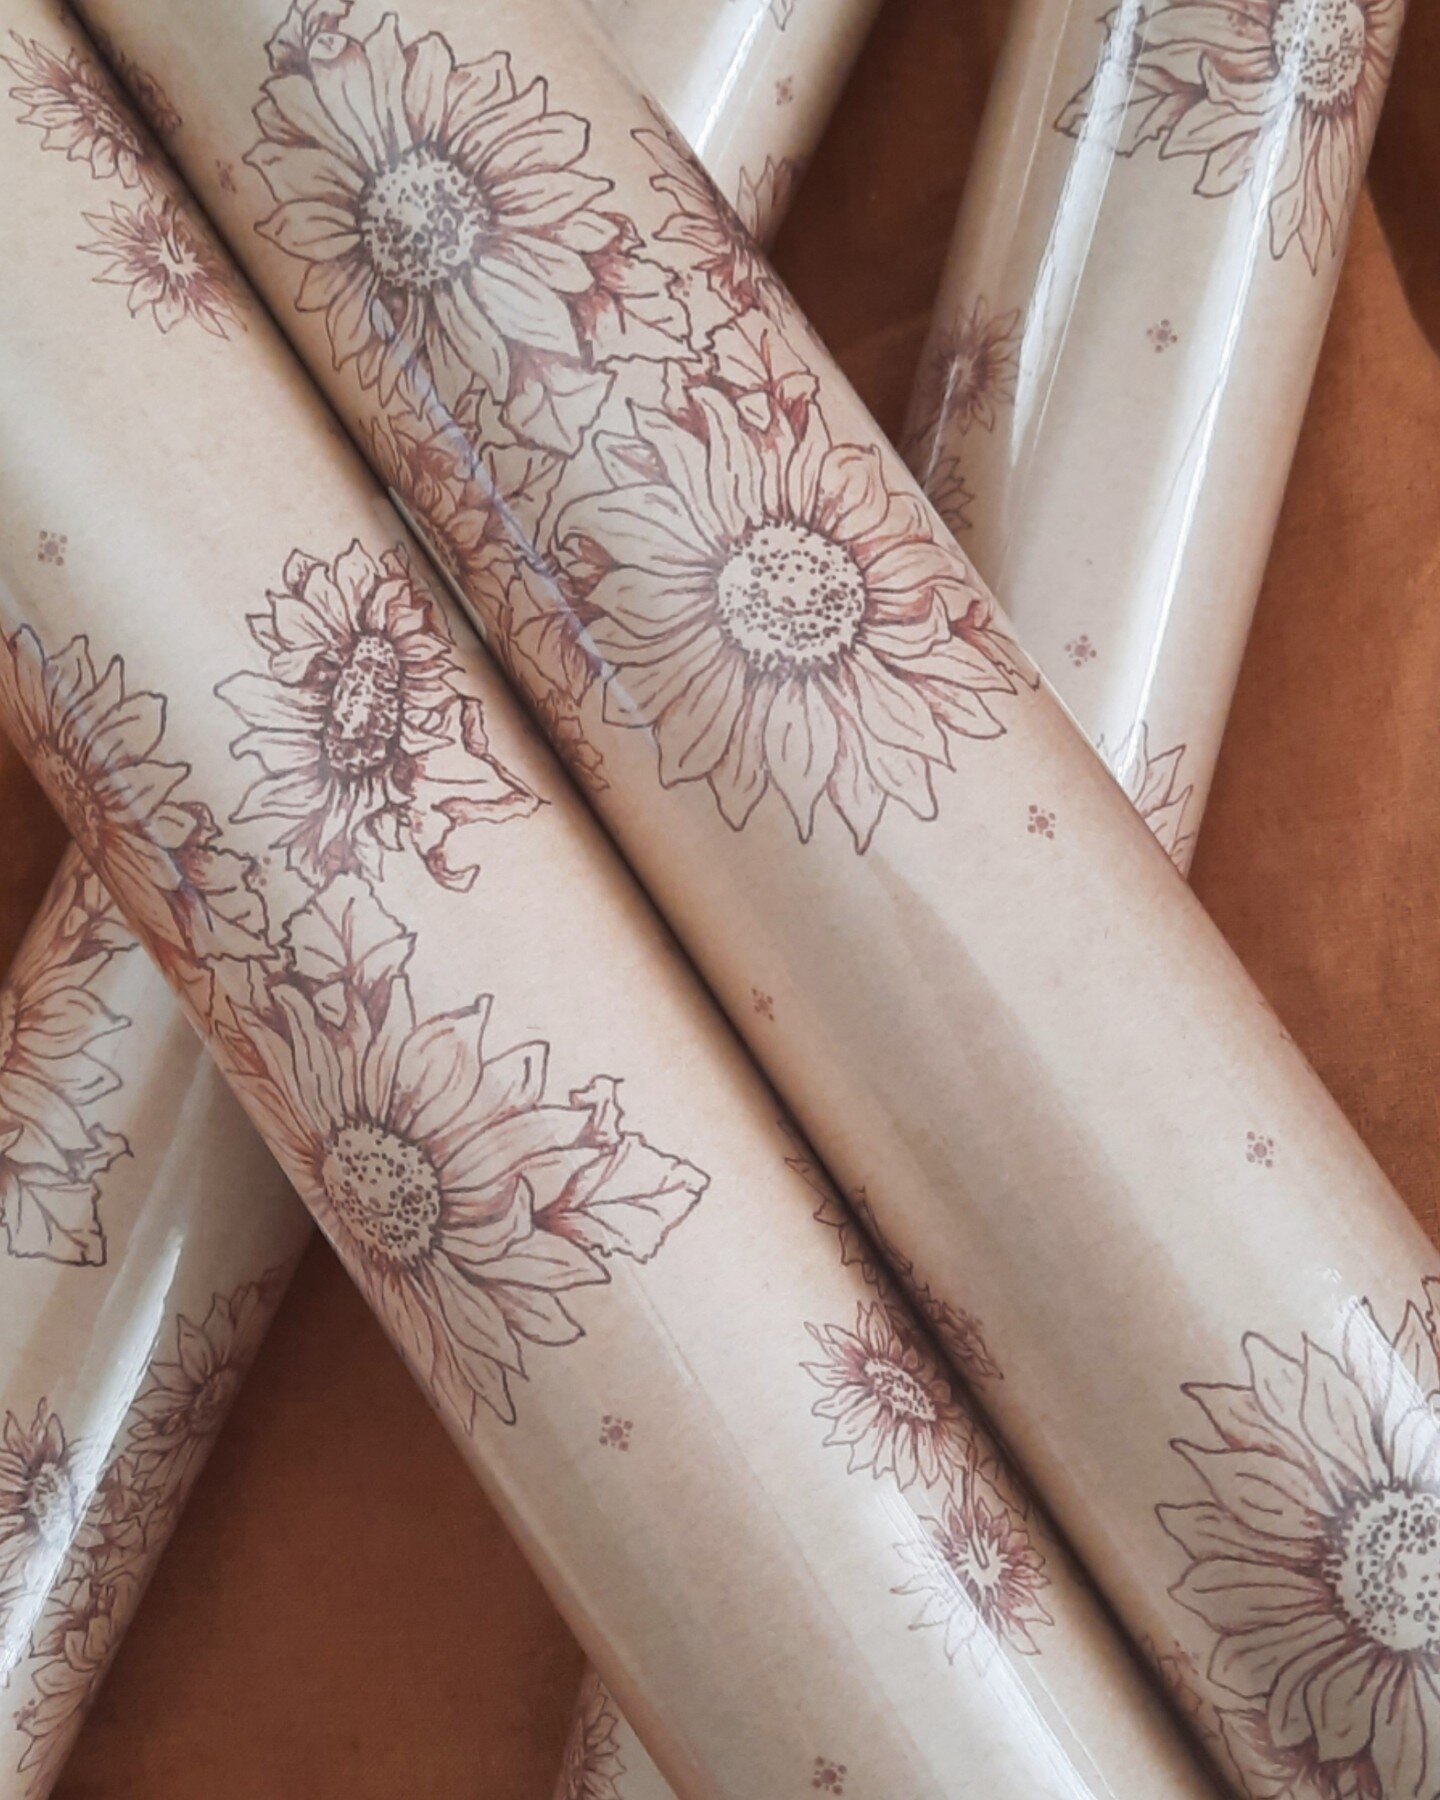 Sunflower wrapping paper, for a rustic feel when wrapping your gifts. Avalible online 🌻🌻
.
.
.
#goldenrosecreative #goldenrose #illustration #art #sketchbook #recycledpaper #sustainable #ecofriendly #botany #flowers #prints #wrappingpaper #recyled 